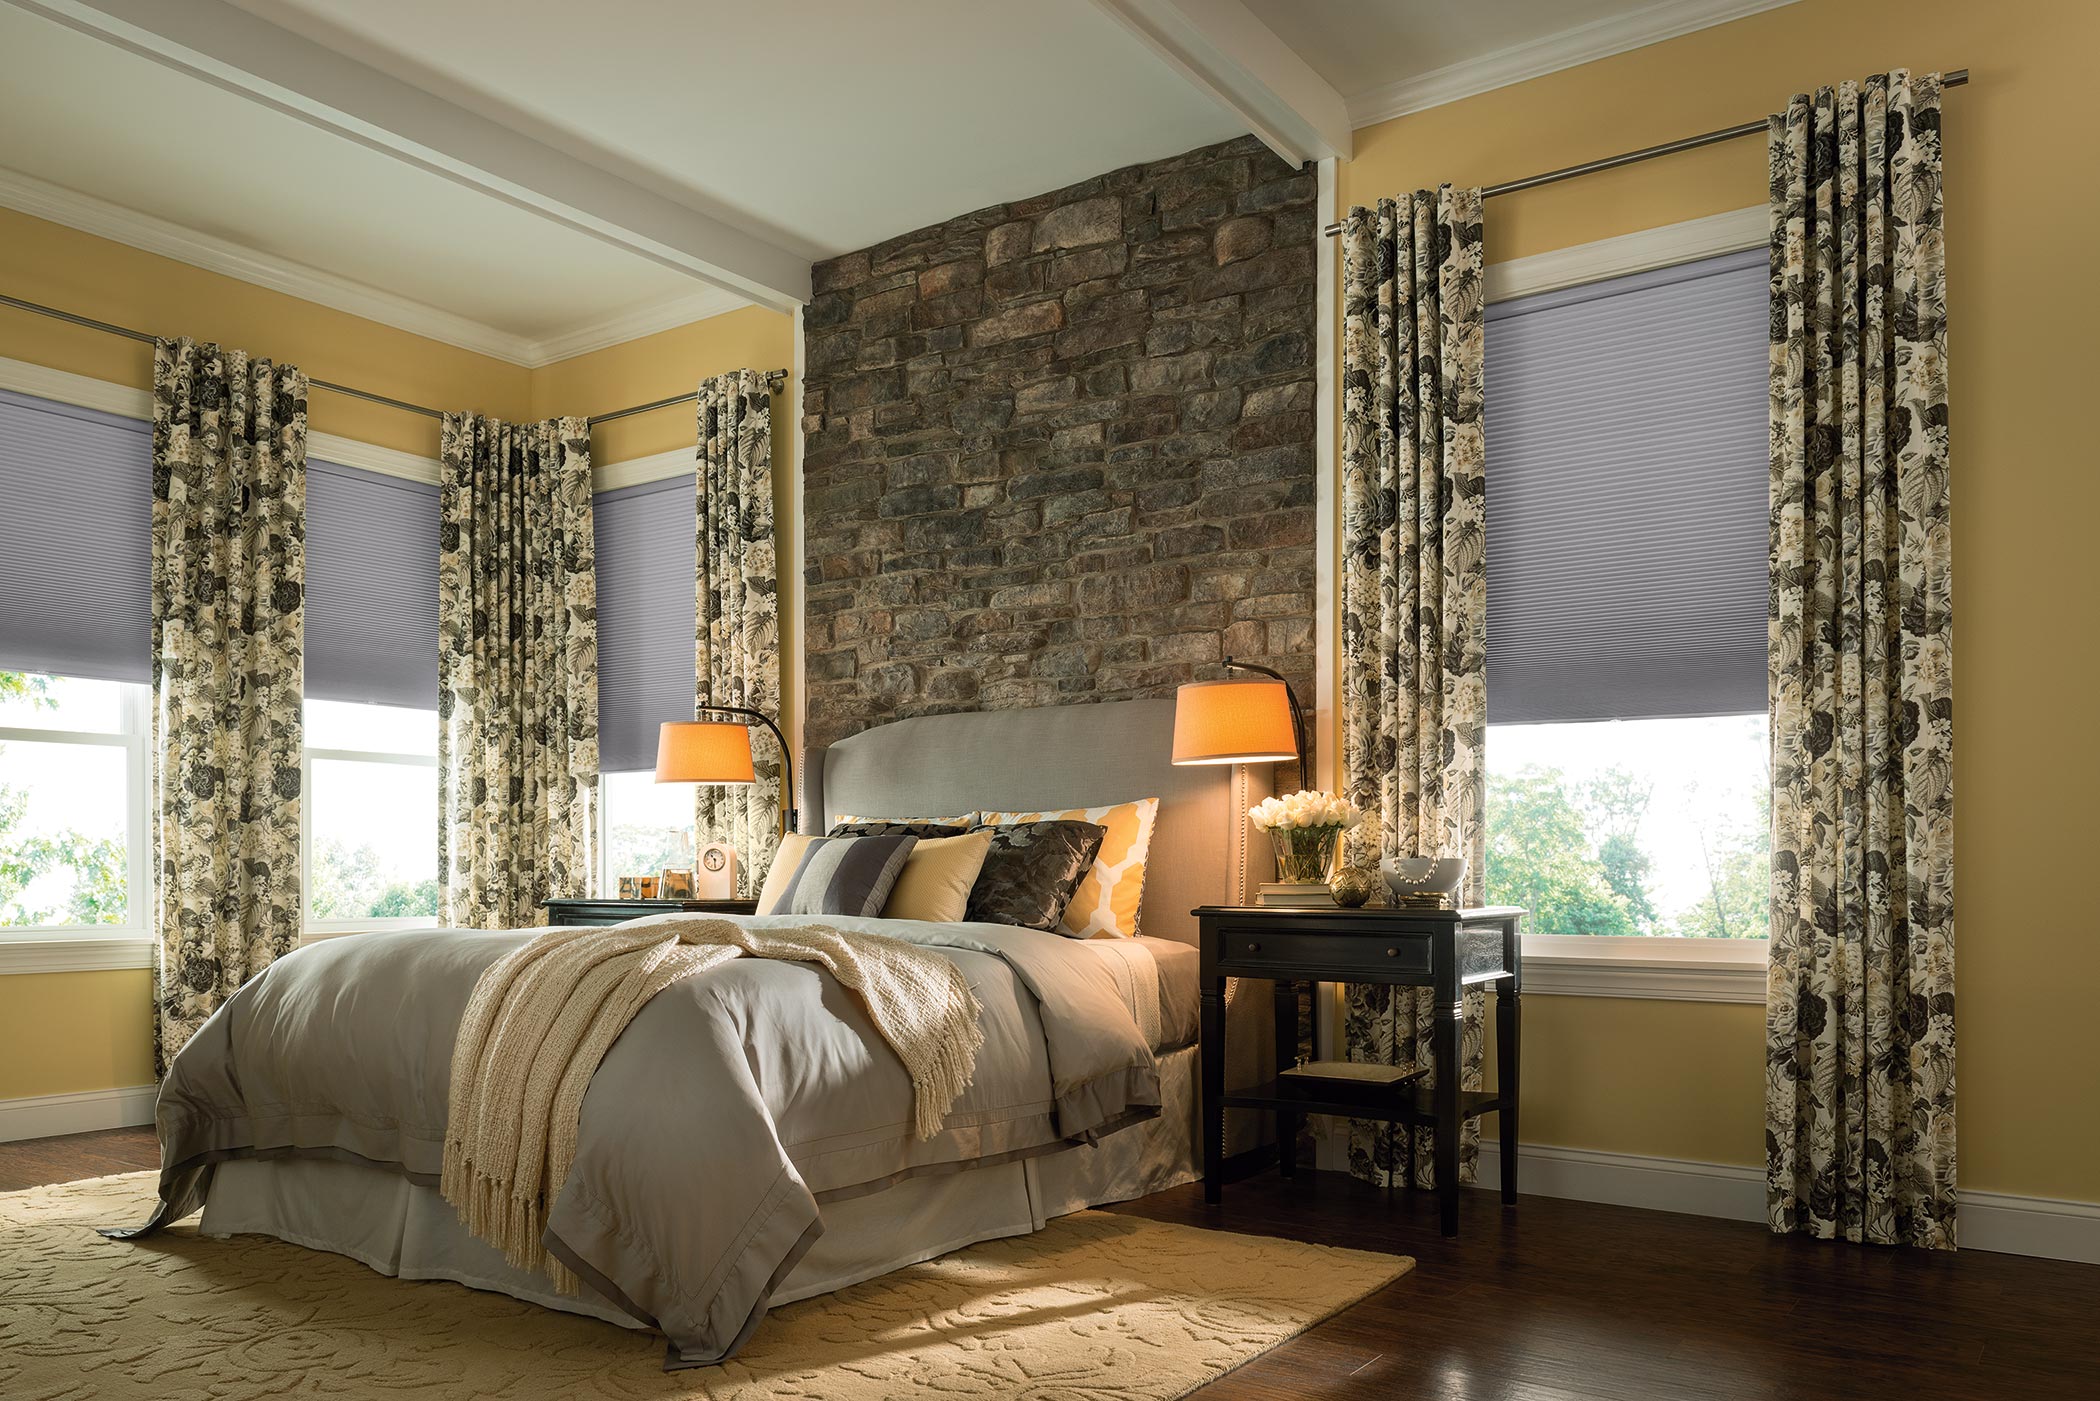 Window Coverings Ideas You Need to Know For Your Home